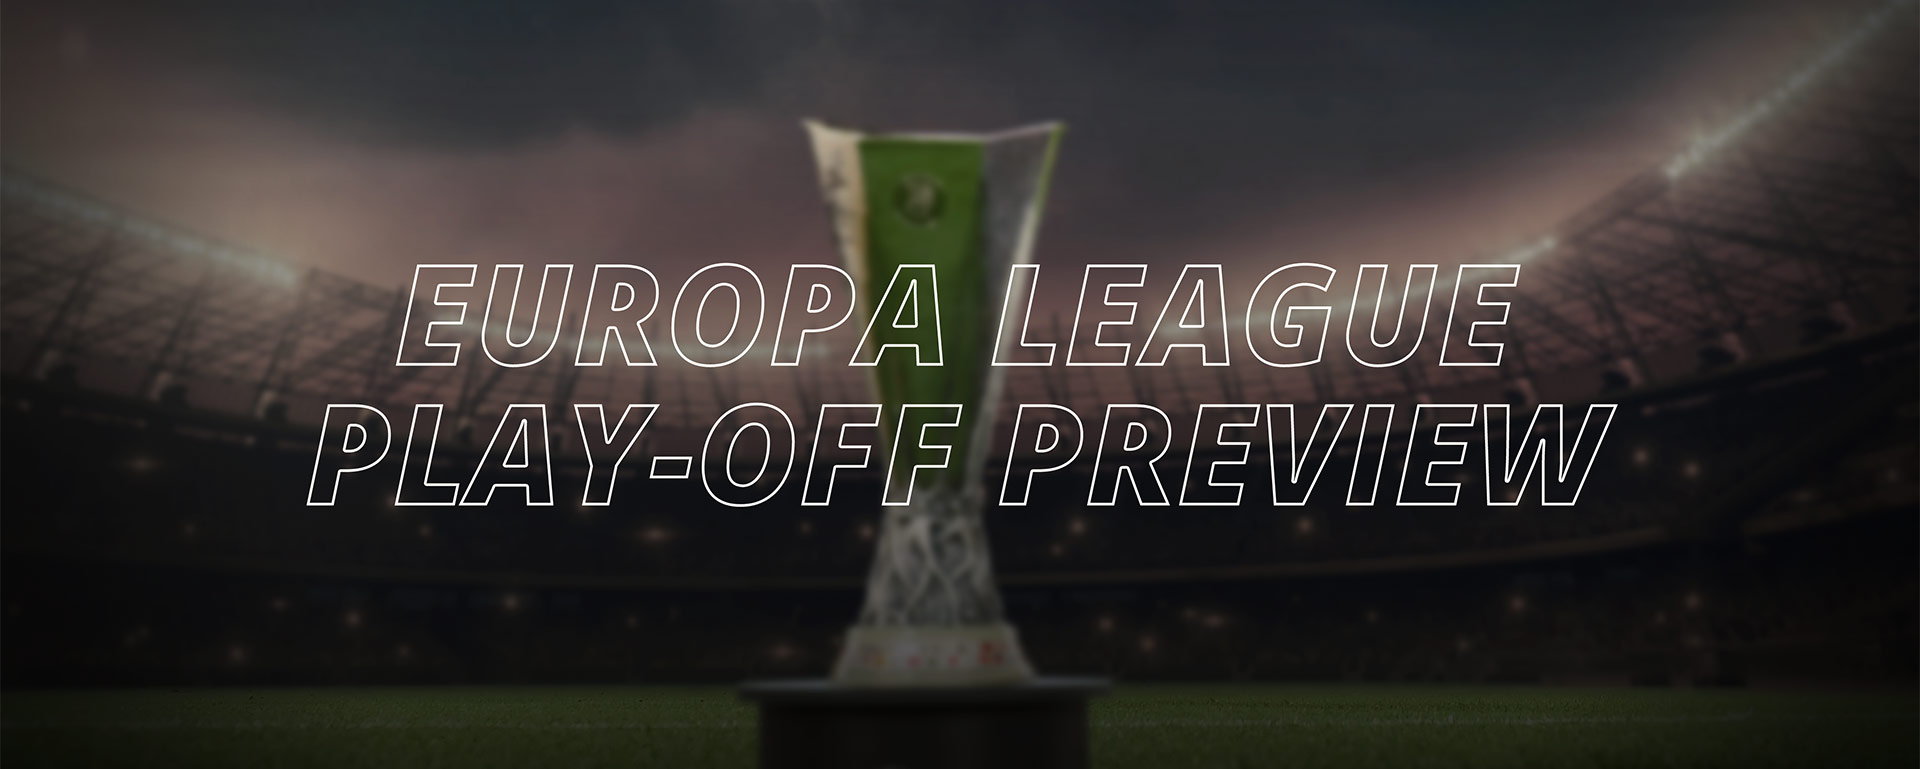 EUROPA LEAGUE: PLAY-OFF PREVIEW